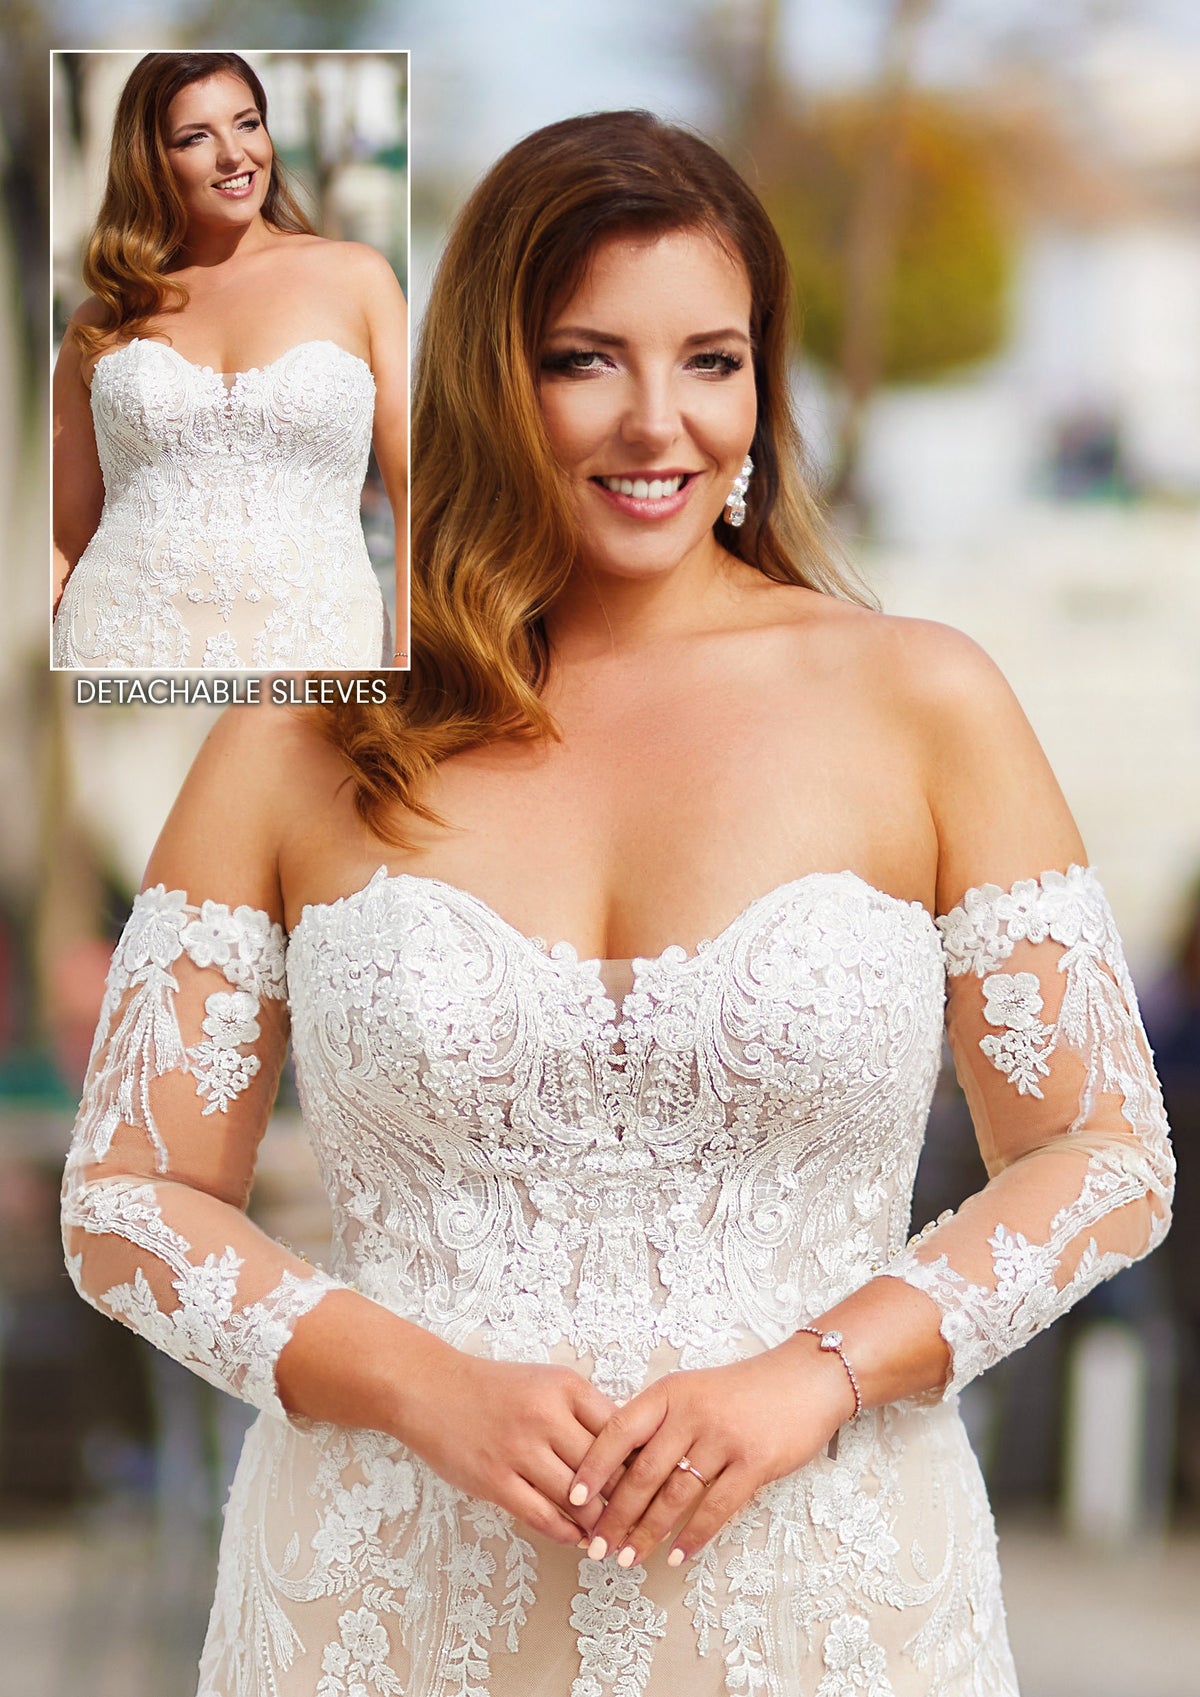 Beautiful Boho Fit and Flare Detachable Illusion Lace Sleeves Sweetheart Neckline Wedding Dress Bridal Gown Open Back Train Strapless